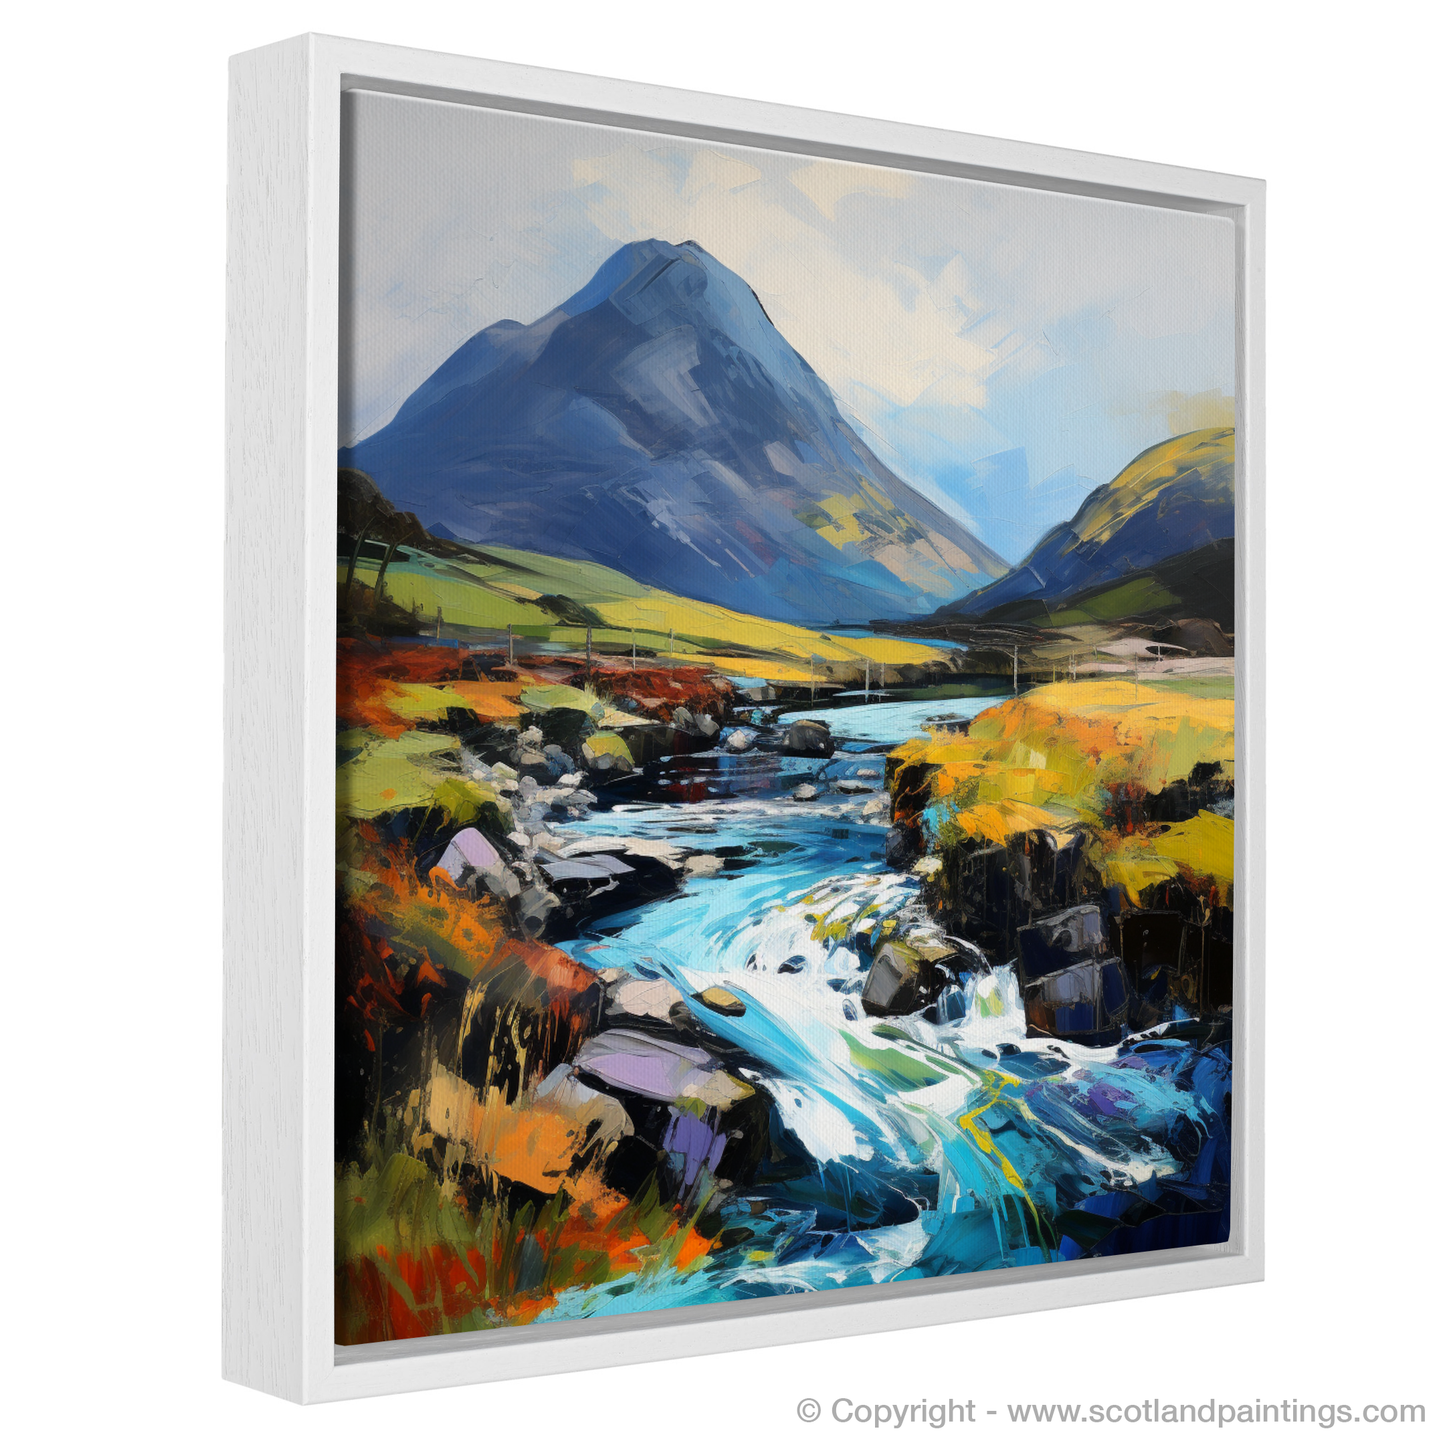 Painting and Art Print of Glen Sannox, Isle of Arran entitled "Captivating Glen Sannox: An Expressionist Ode to the Scottish Highlands".